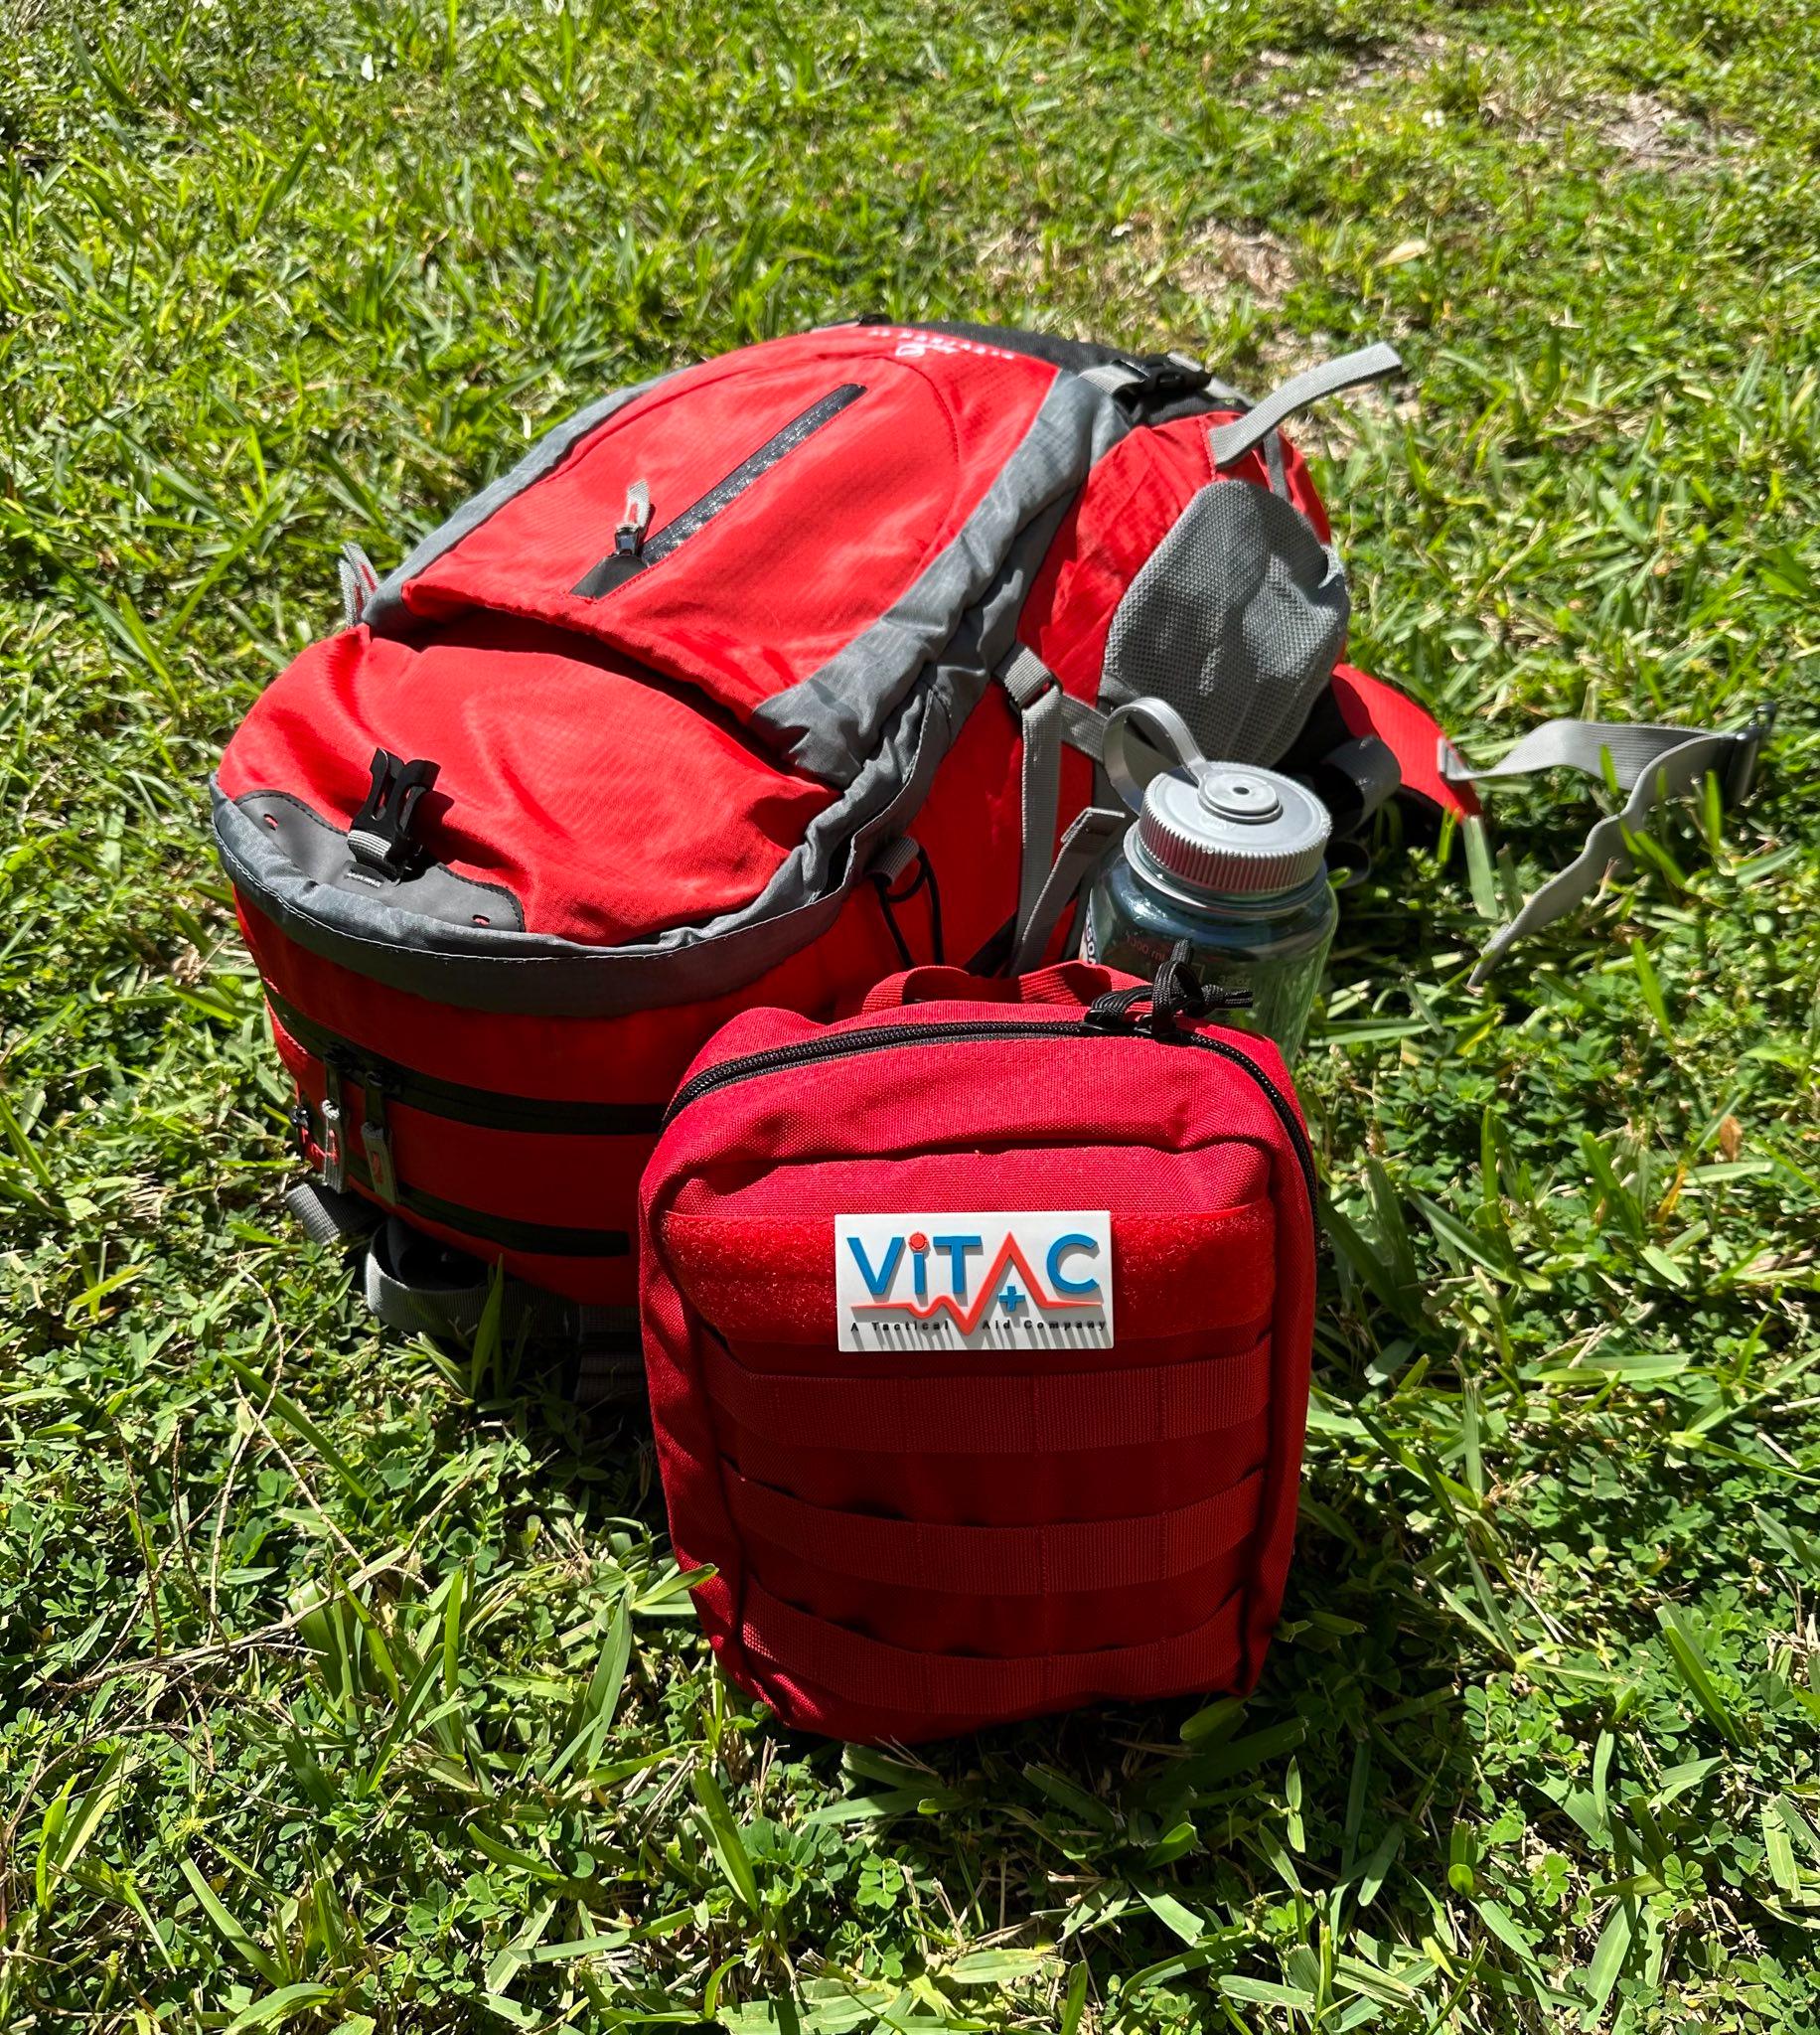 ViTAC Adventurer First Aid Kit, Red, Lifestyle in Grass